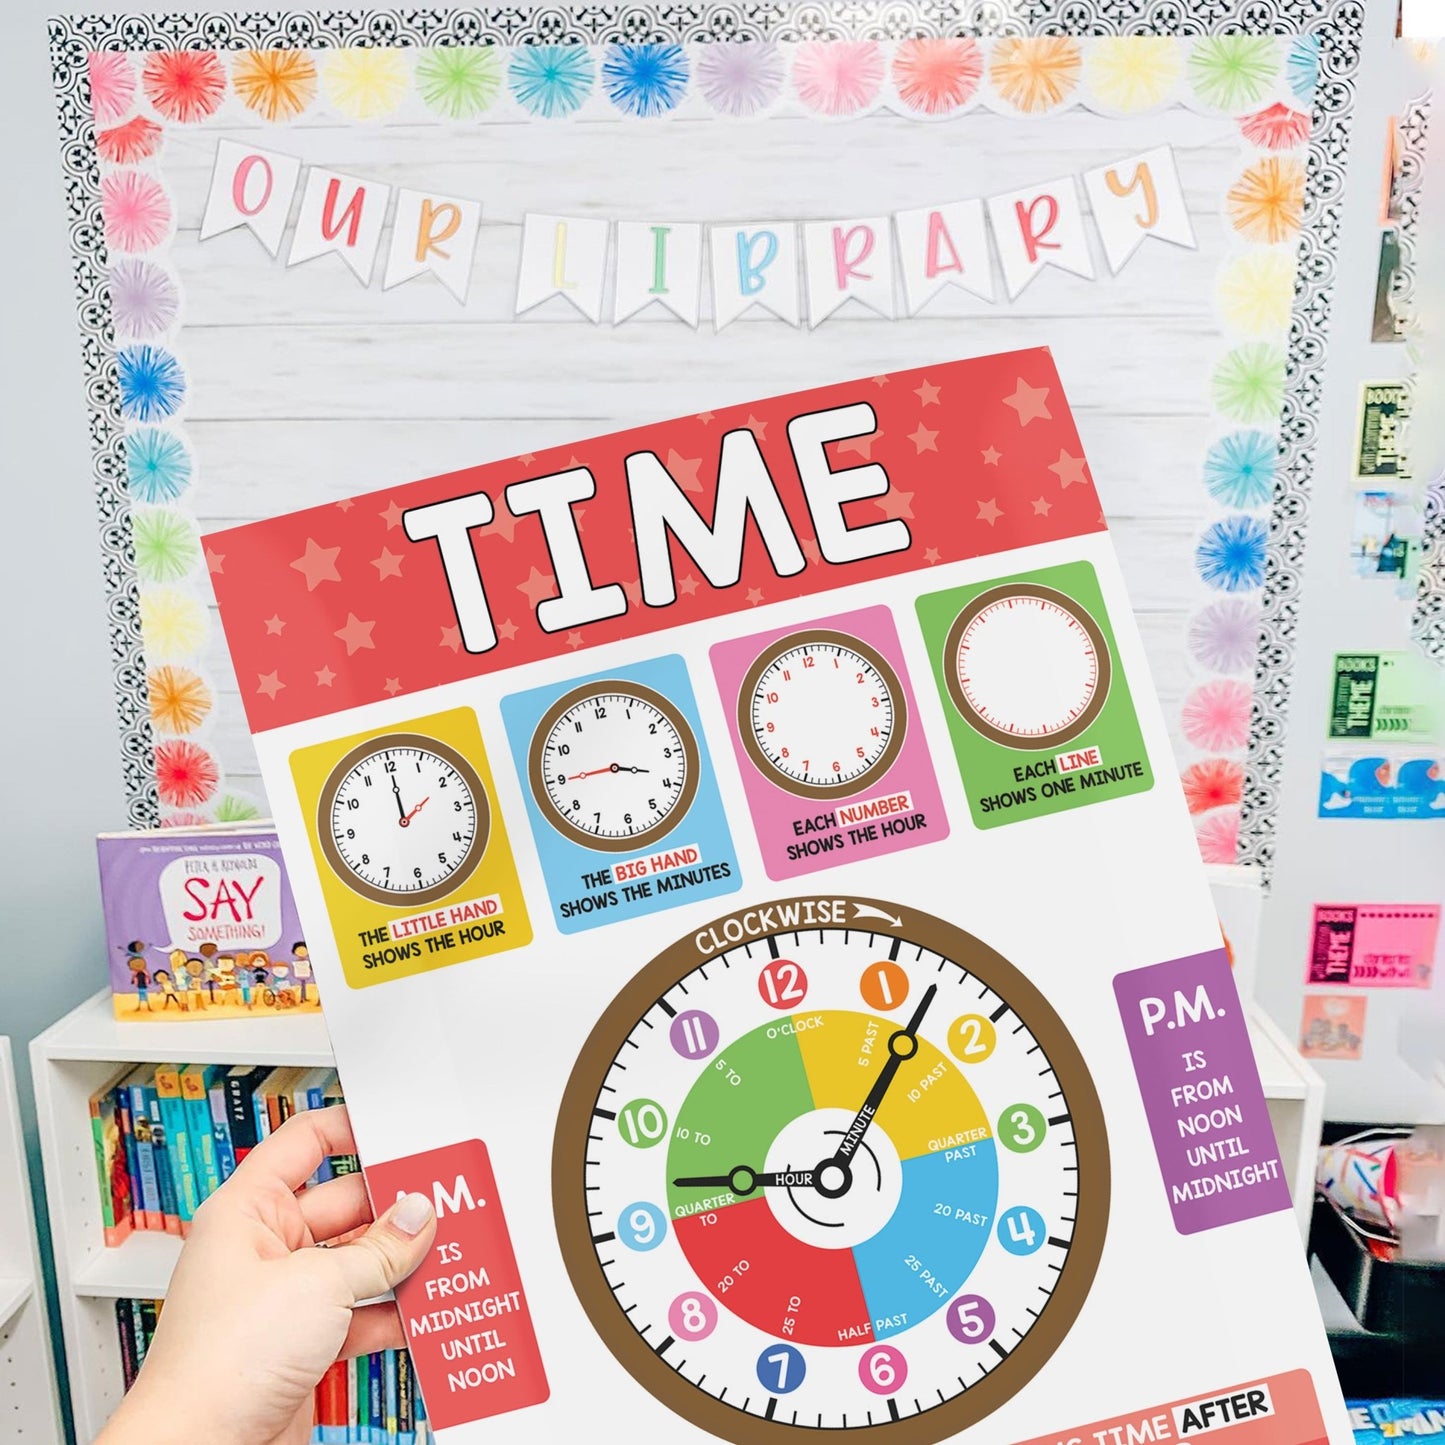 Vibrant Tell the Time Chart Poster Laminated For Preschoolers/Kids, Educational Posters For Toddlers, Learning Posters For Toddlers 1-3, Preschool Homeschool Posters For Kindergarten Classroom Wall Decor - BEAWART